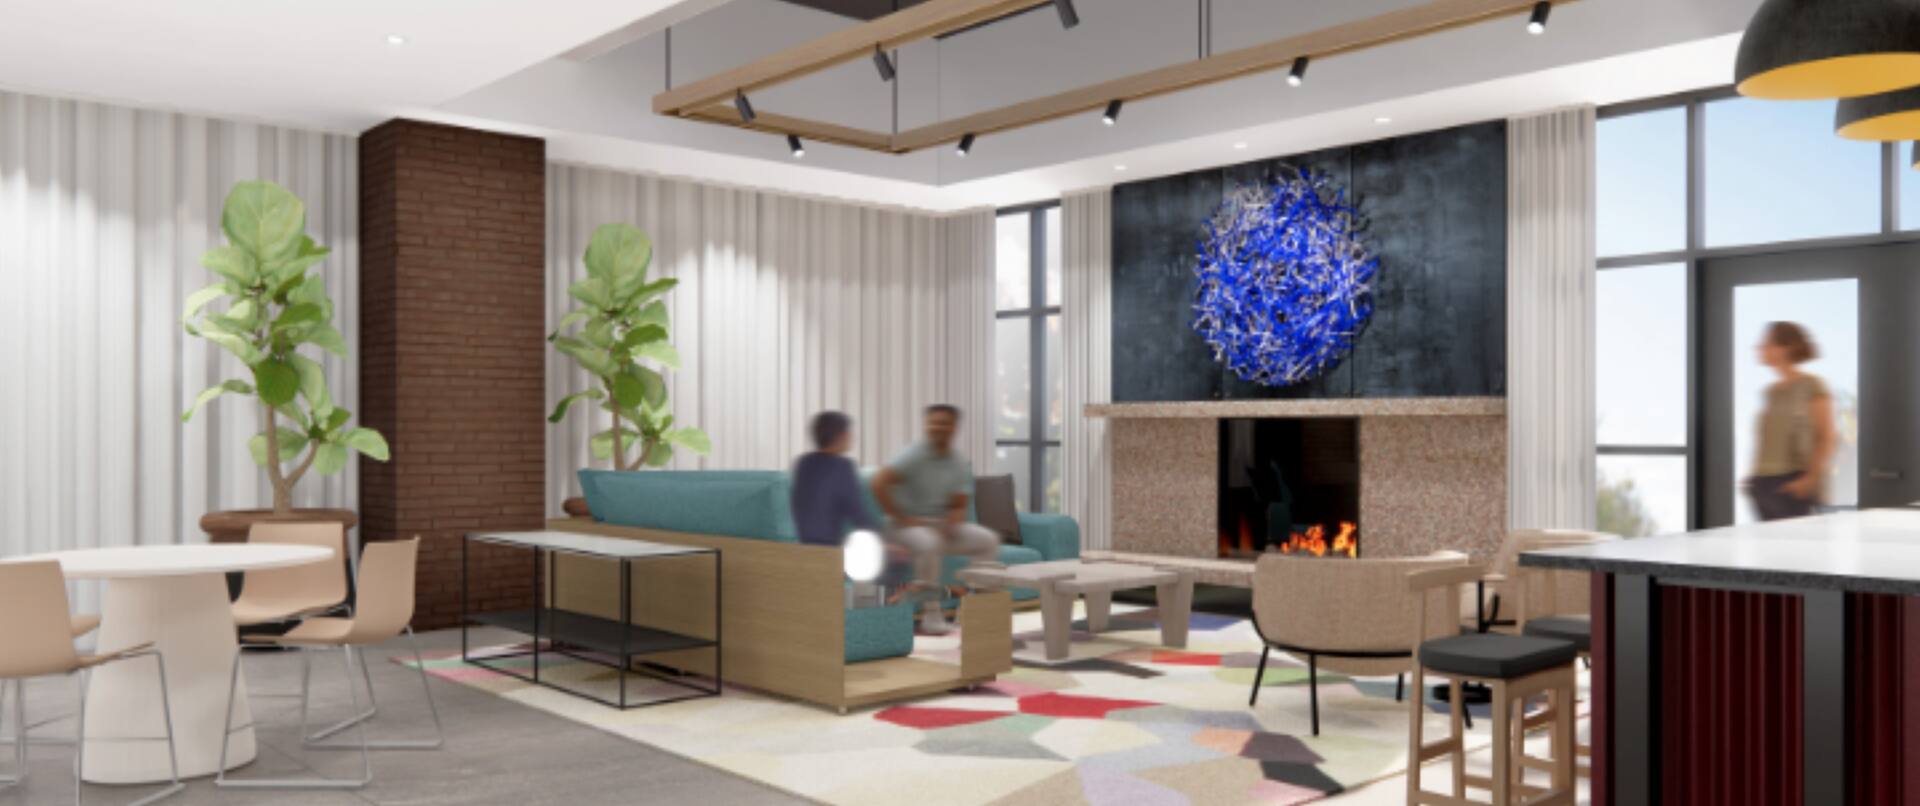 Lobby seating with fireplace and blurred guests